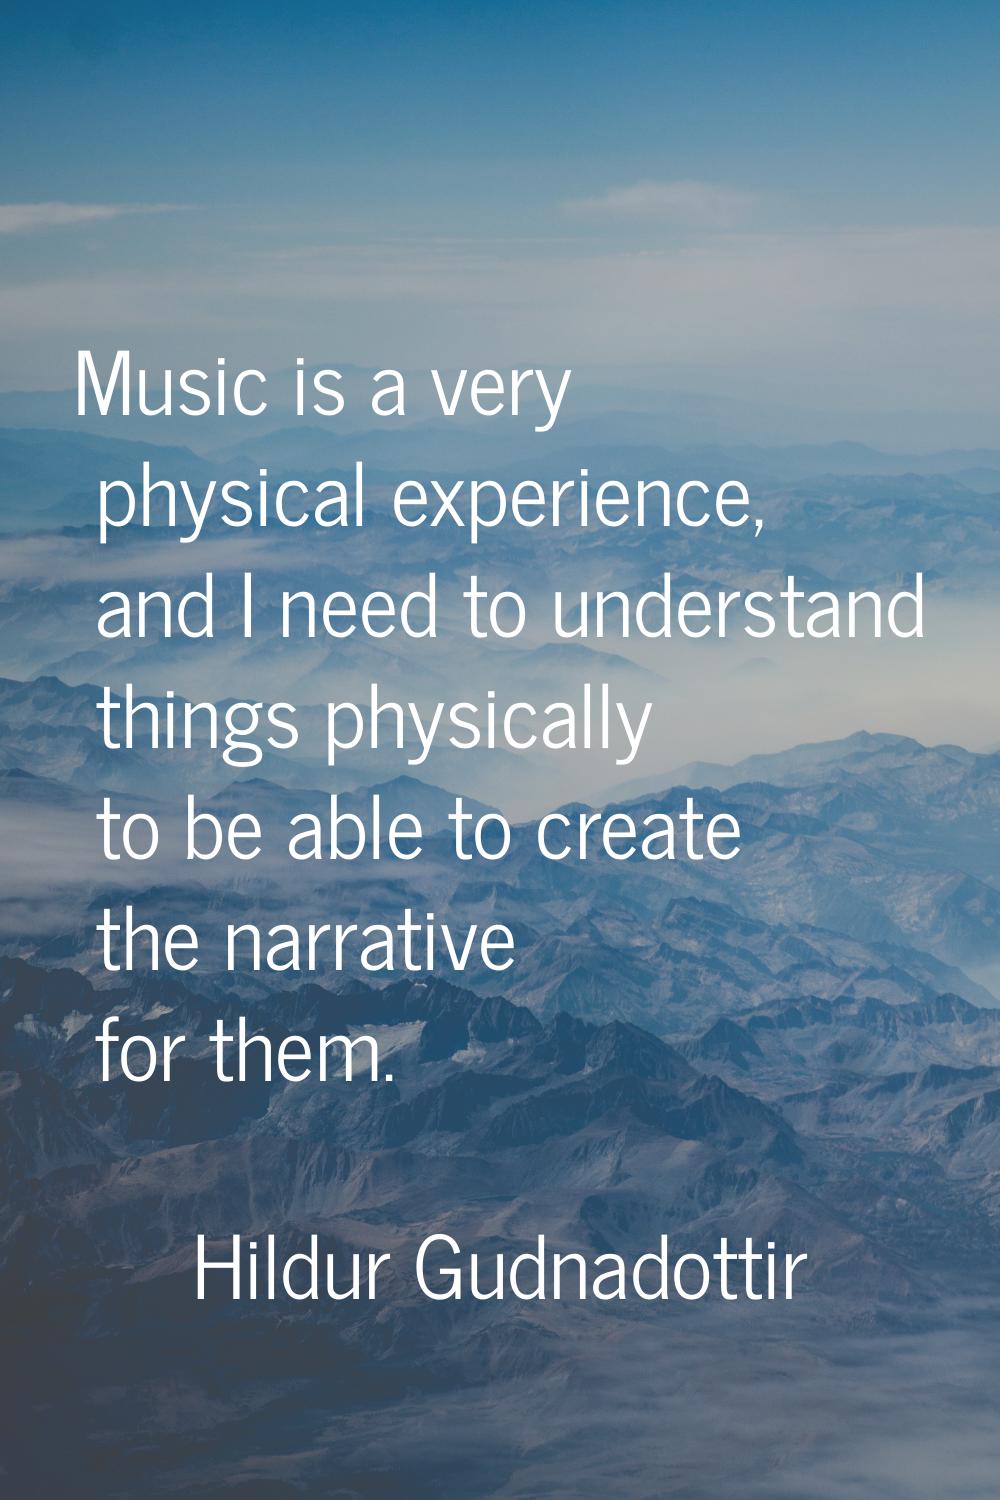 Music is a very physical experience, and I need to understand things physically to be able to creat